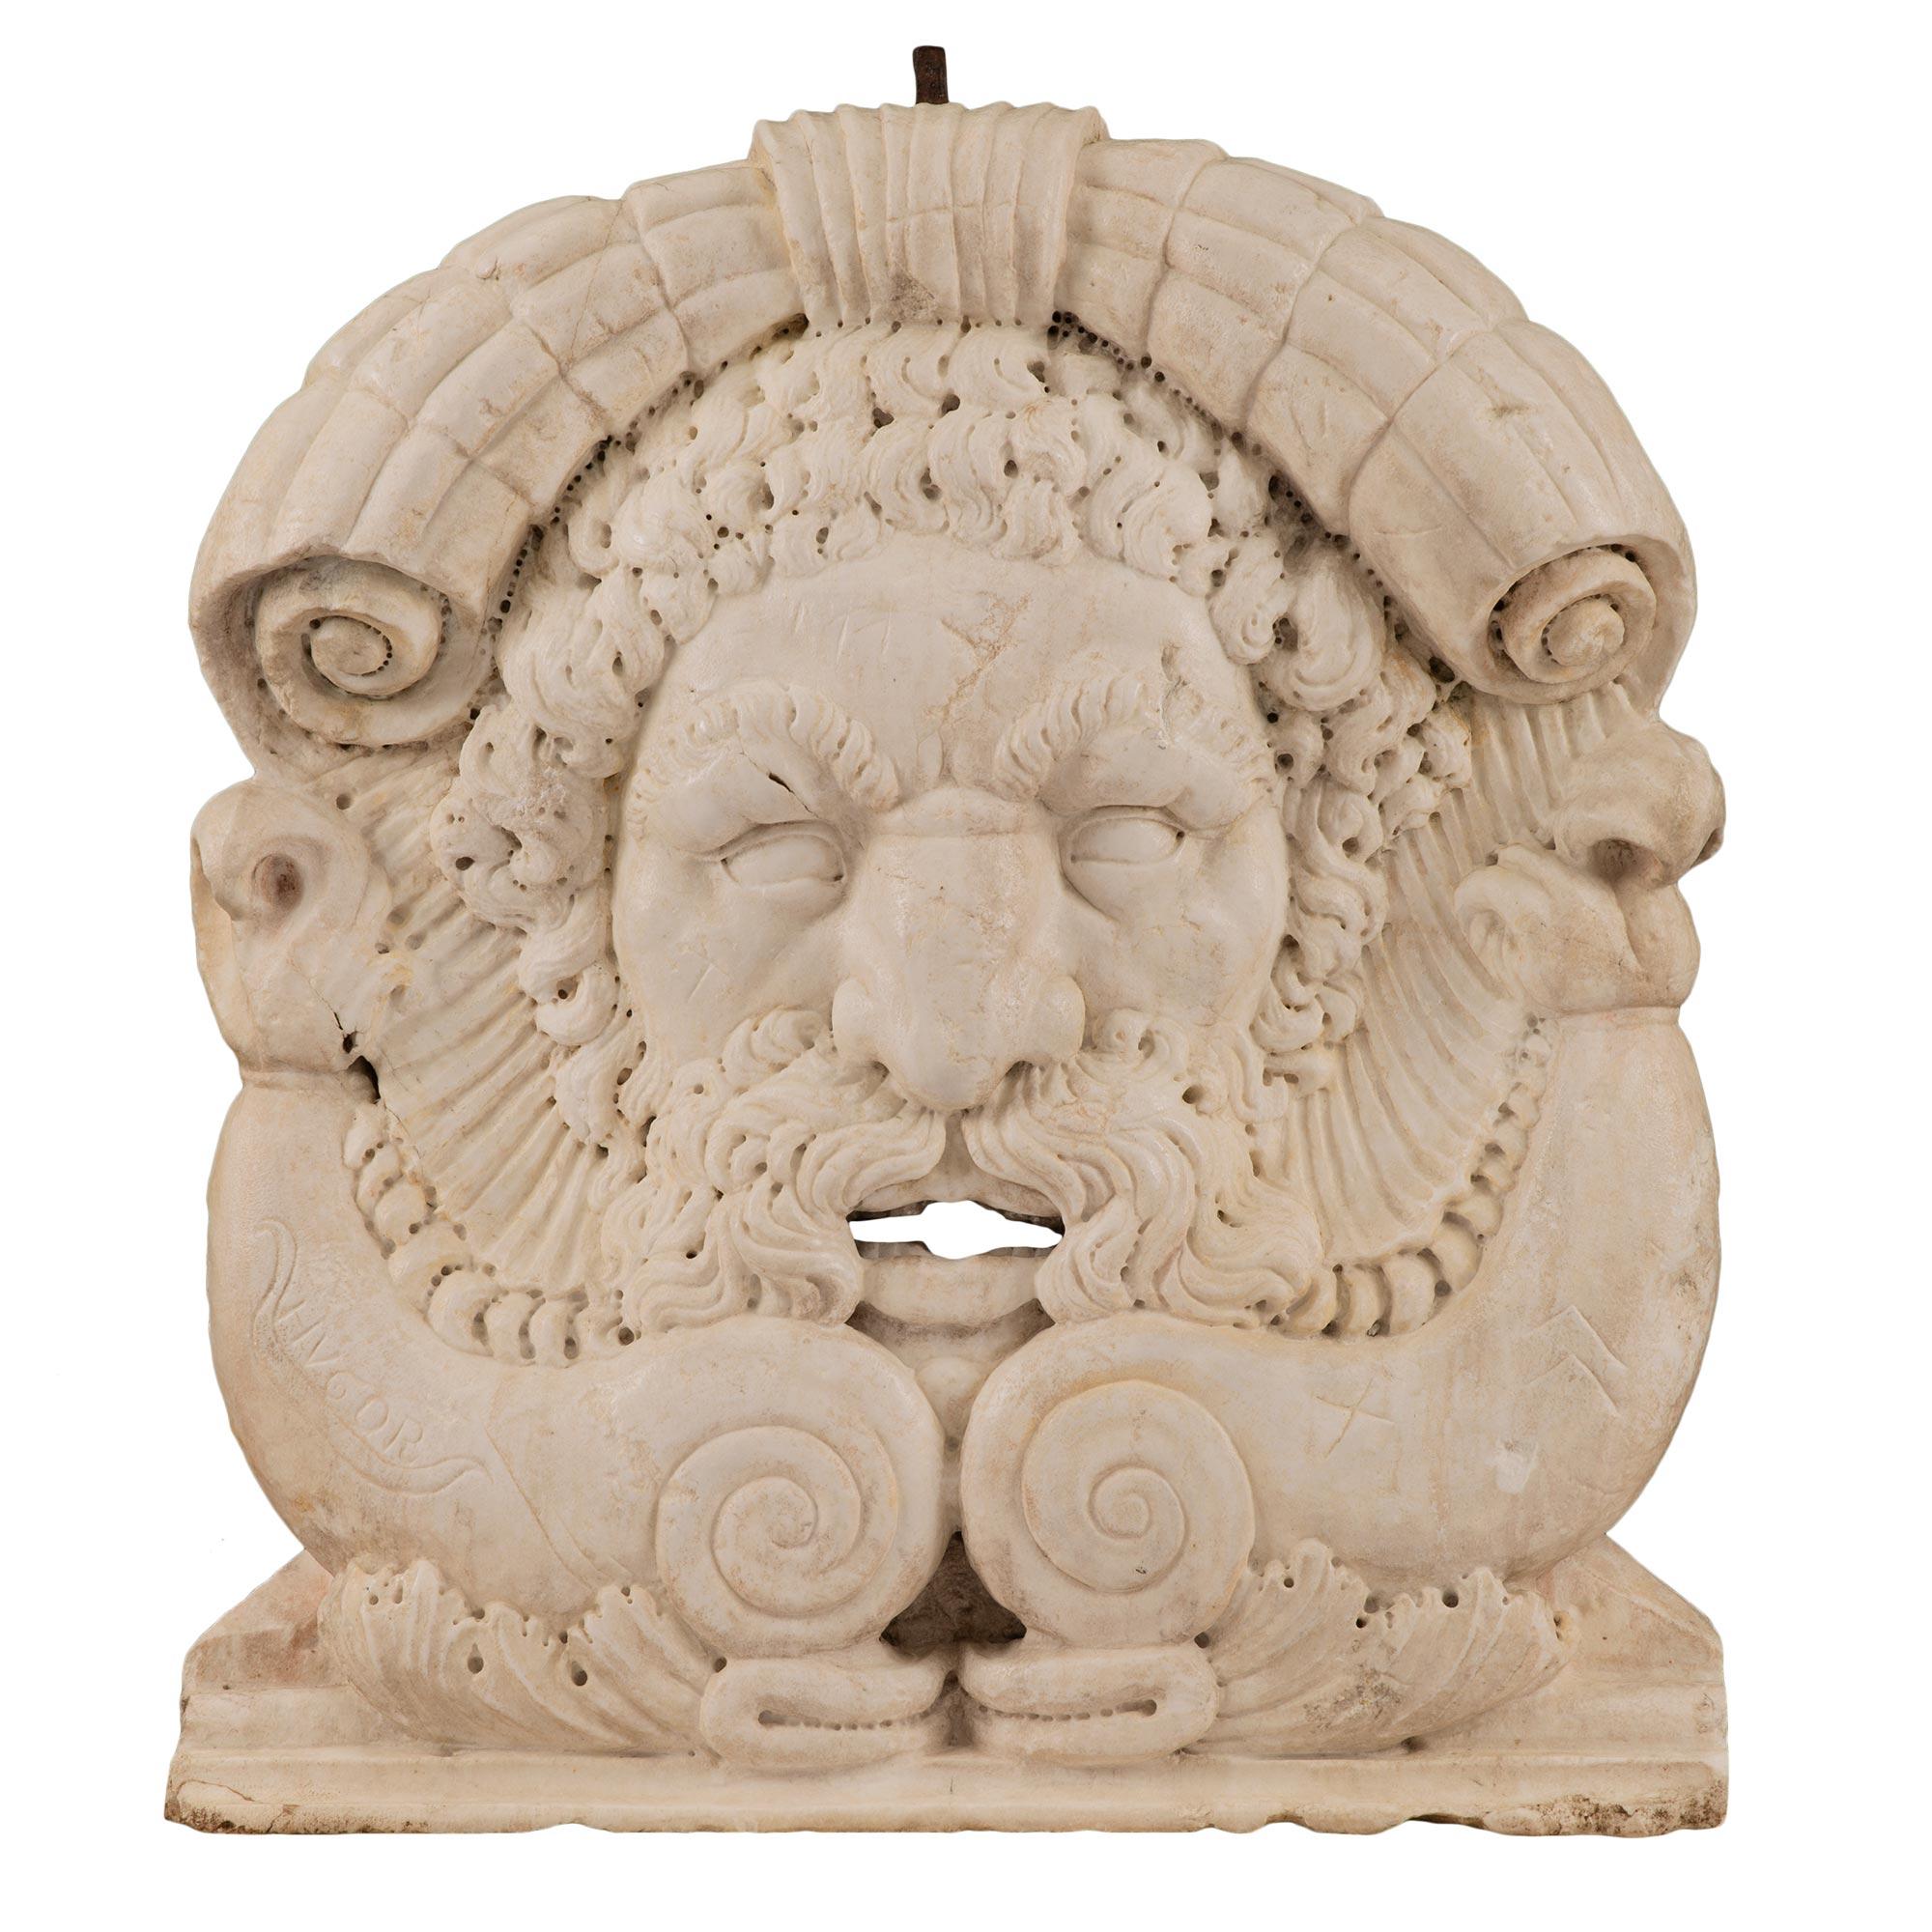 A stunning Italian early 19th century white carrara marble fountain head signed HVGOR. This most impressive and masterfully sculpted fountain head displays intricate attention to detail throughout. At the center is an exceptional and handsome